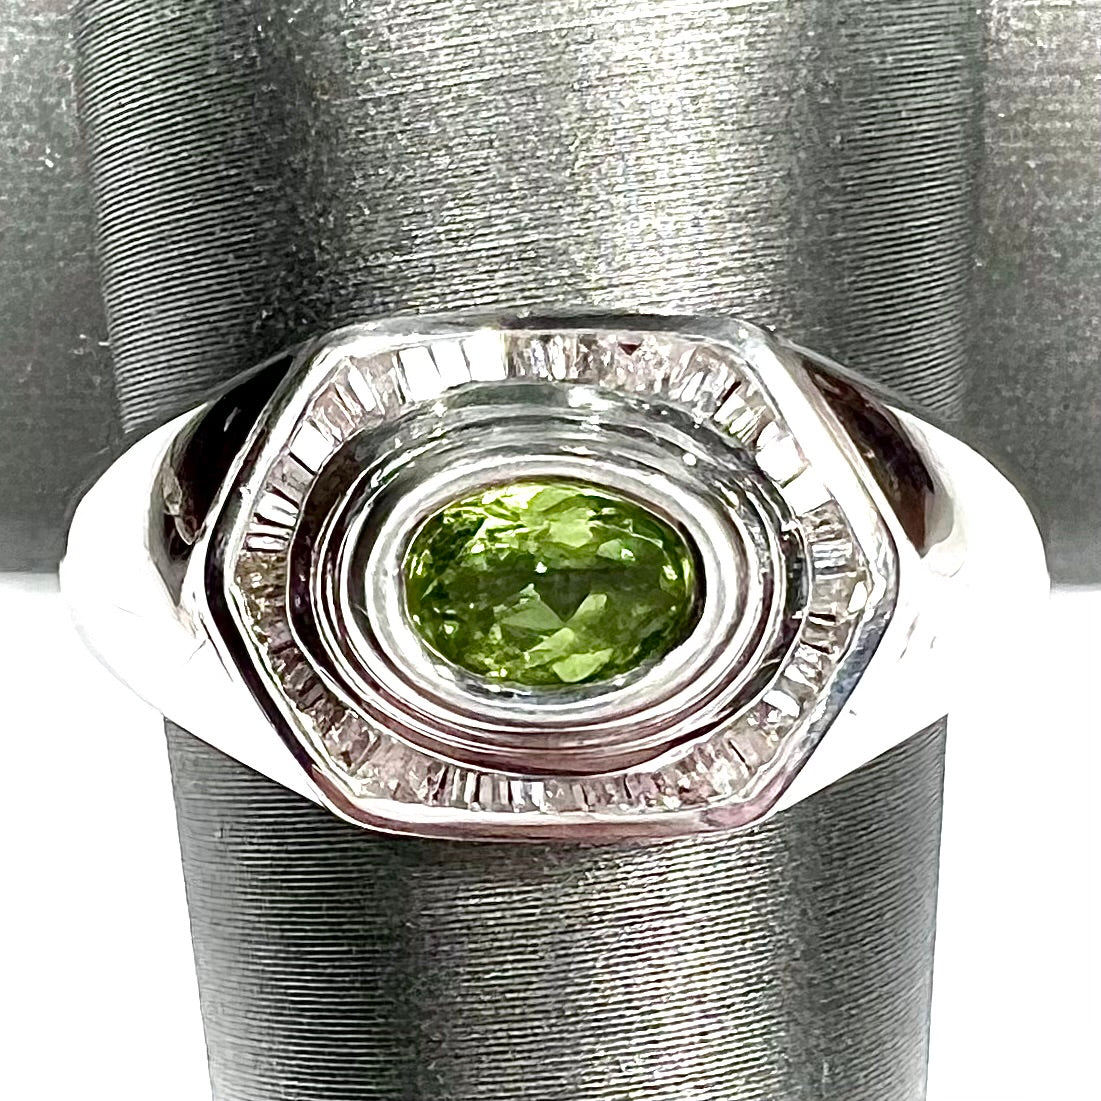 A sterling silver men's ring set with green peridot surrounded by baguette cut diamonds.